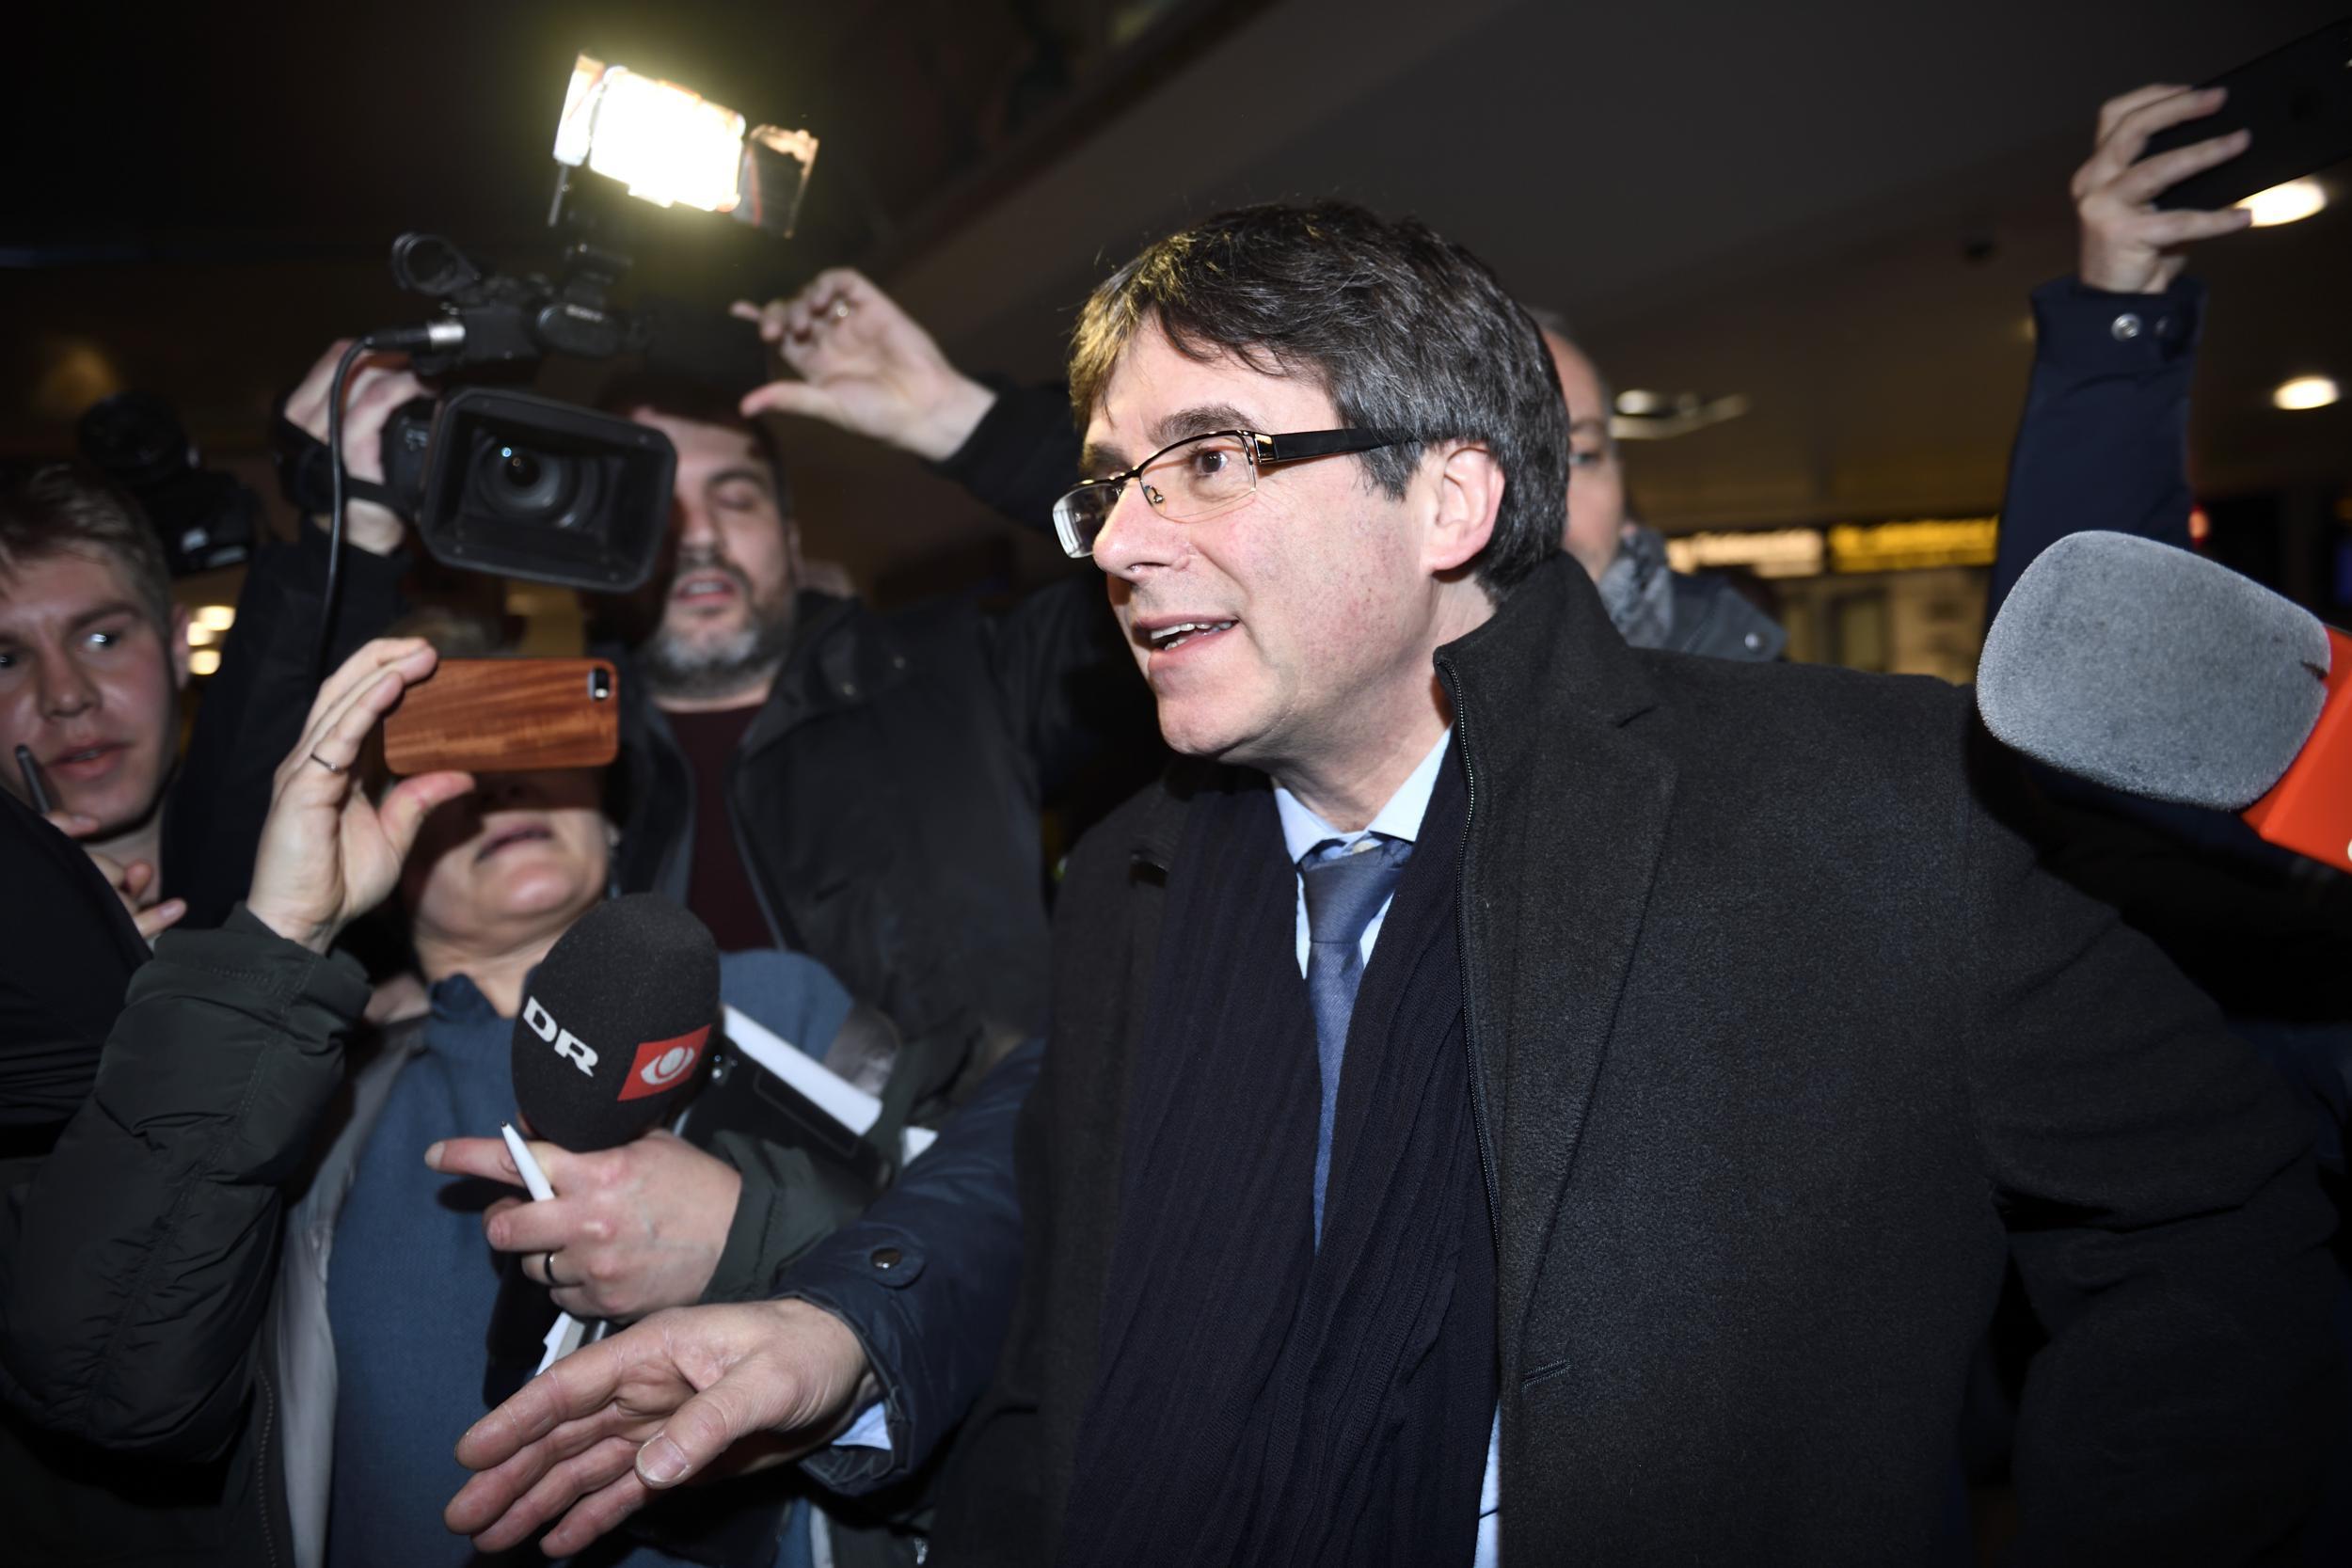 Mr Puigdemont is currently in self-imposed exile in Belgium